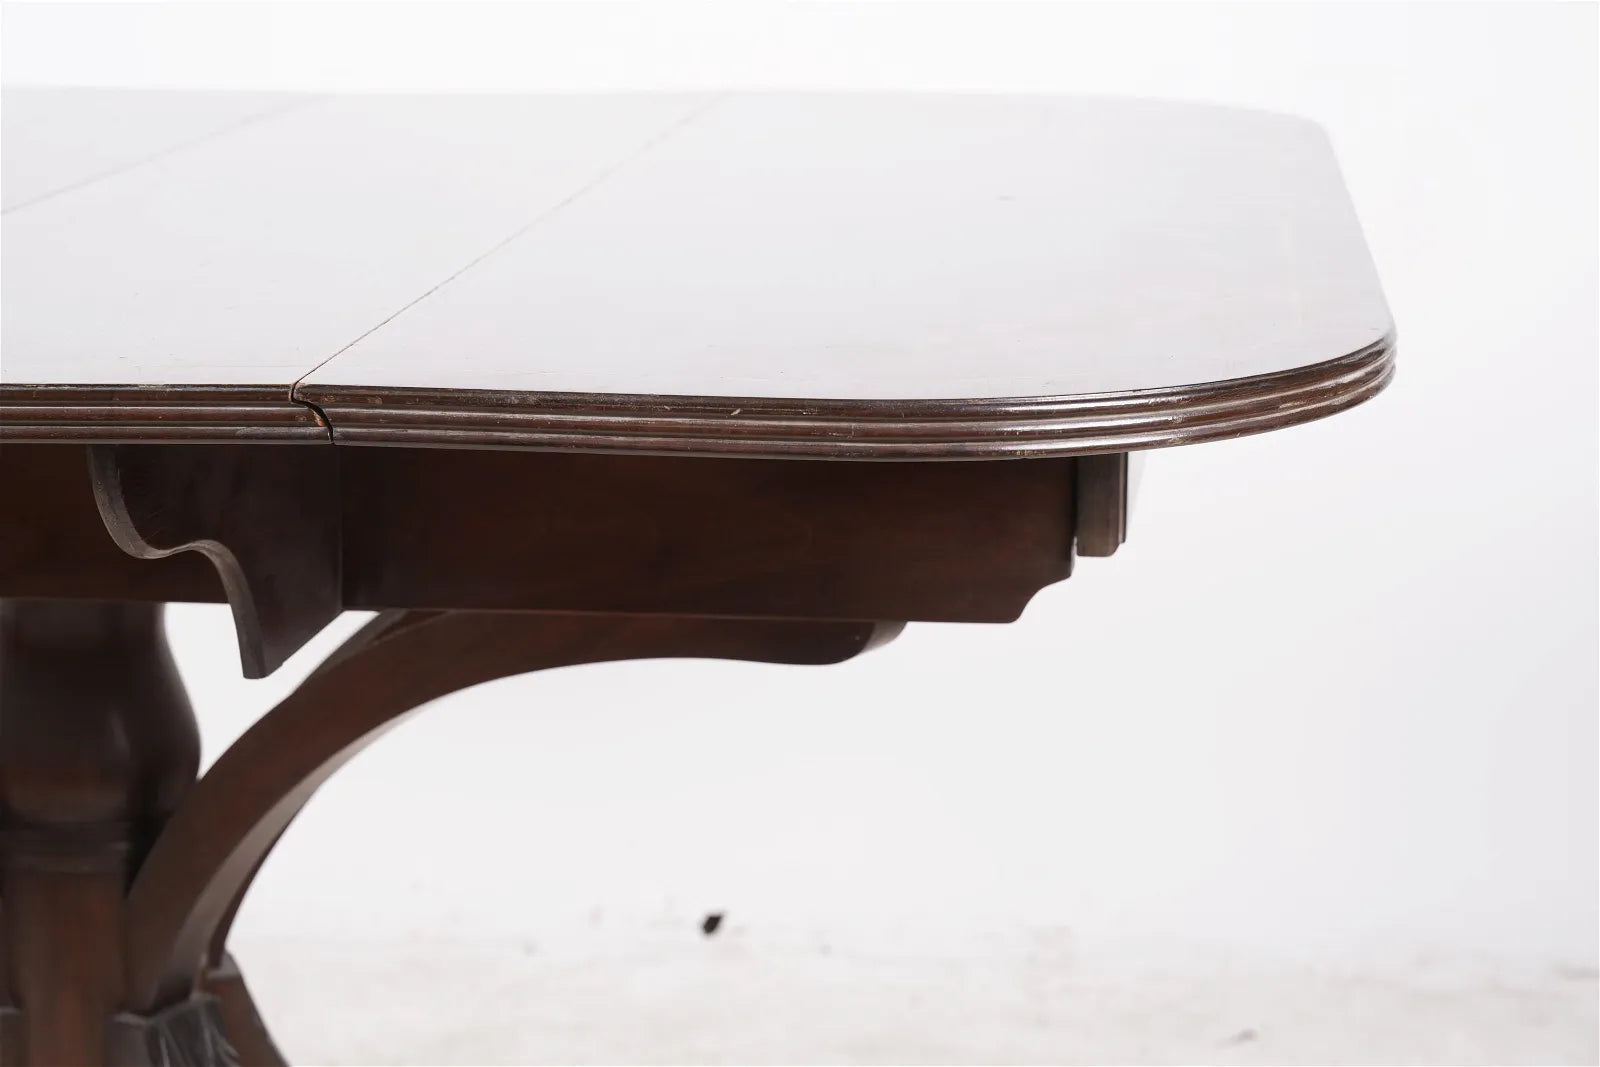 AF1-155: Antique Early 20th C English Regency Style Mahogany Drop Leaf Dining Table w/ Leaves